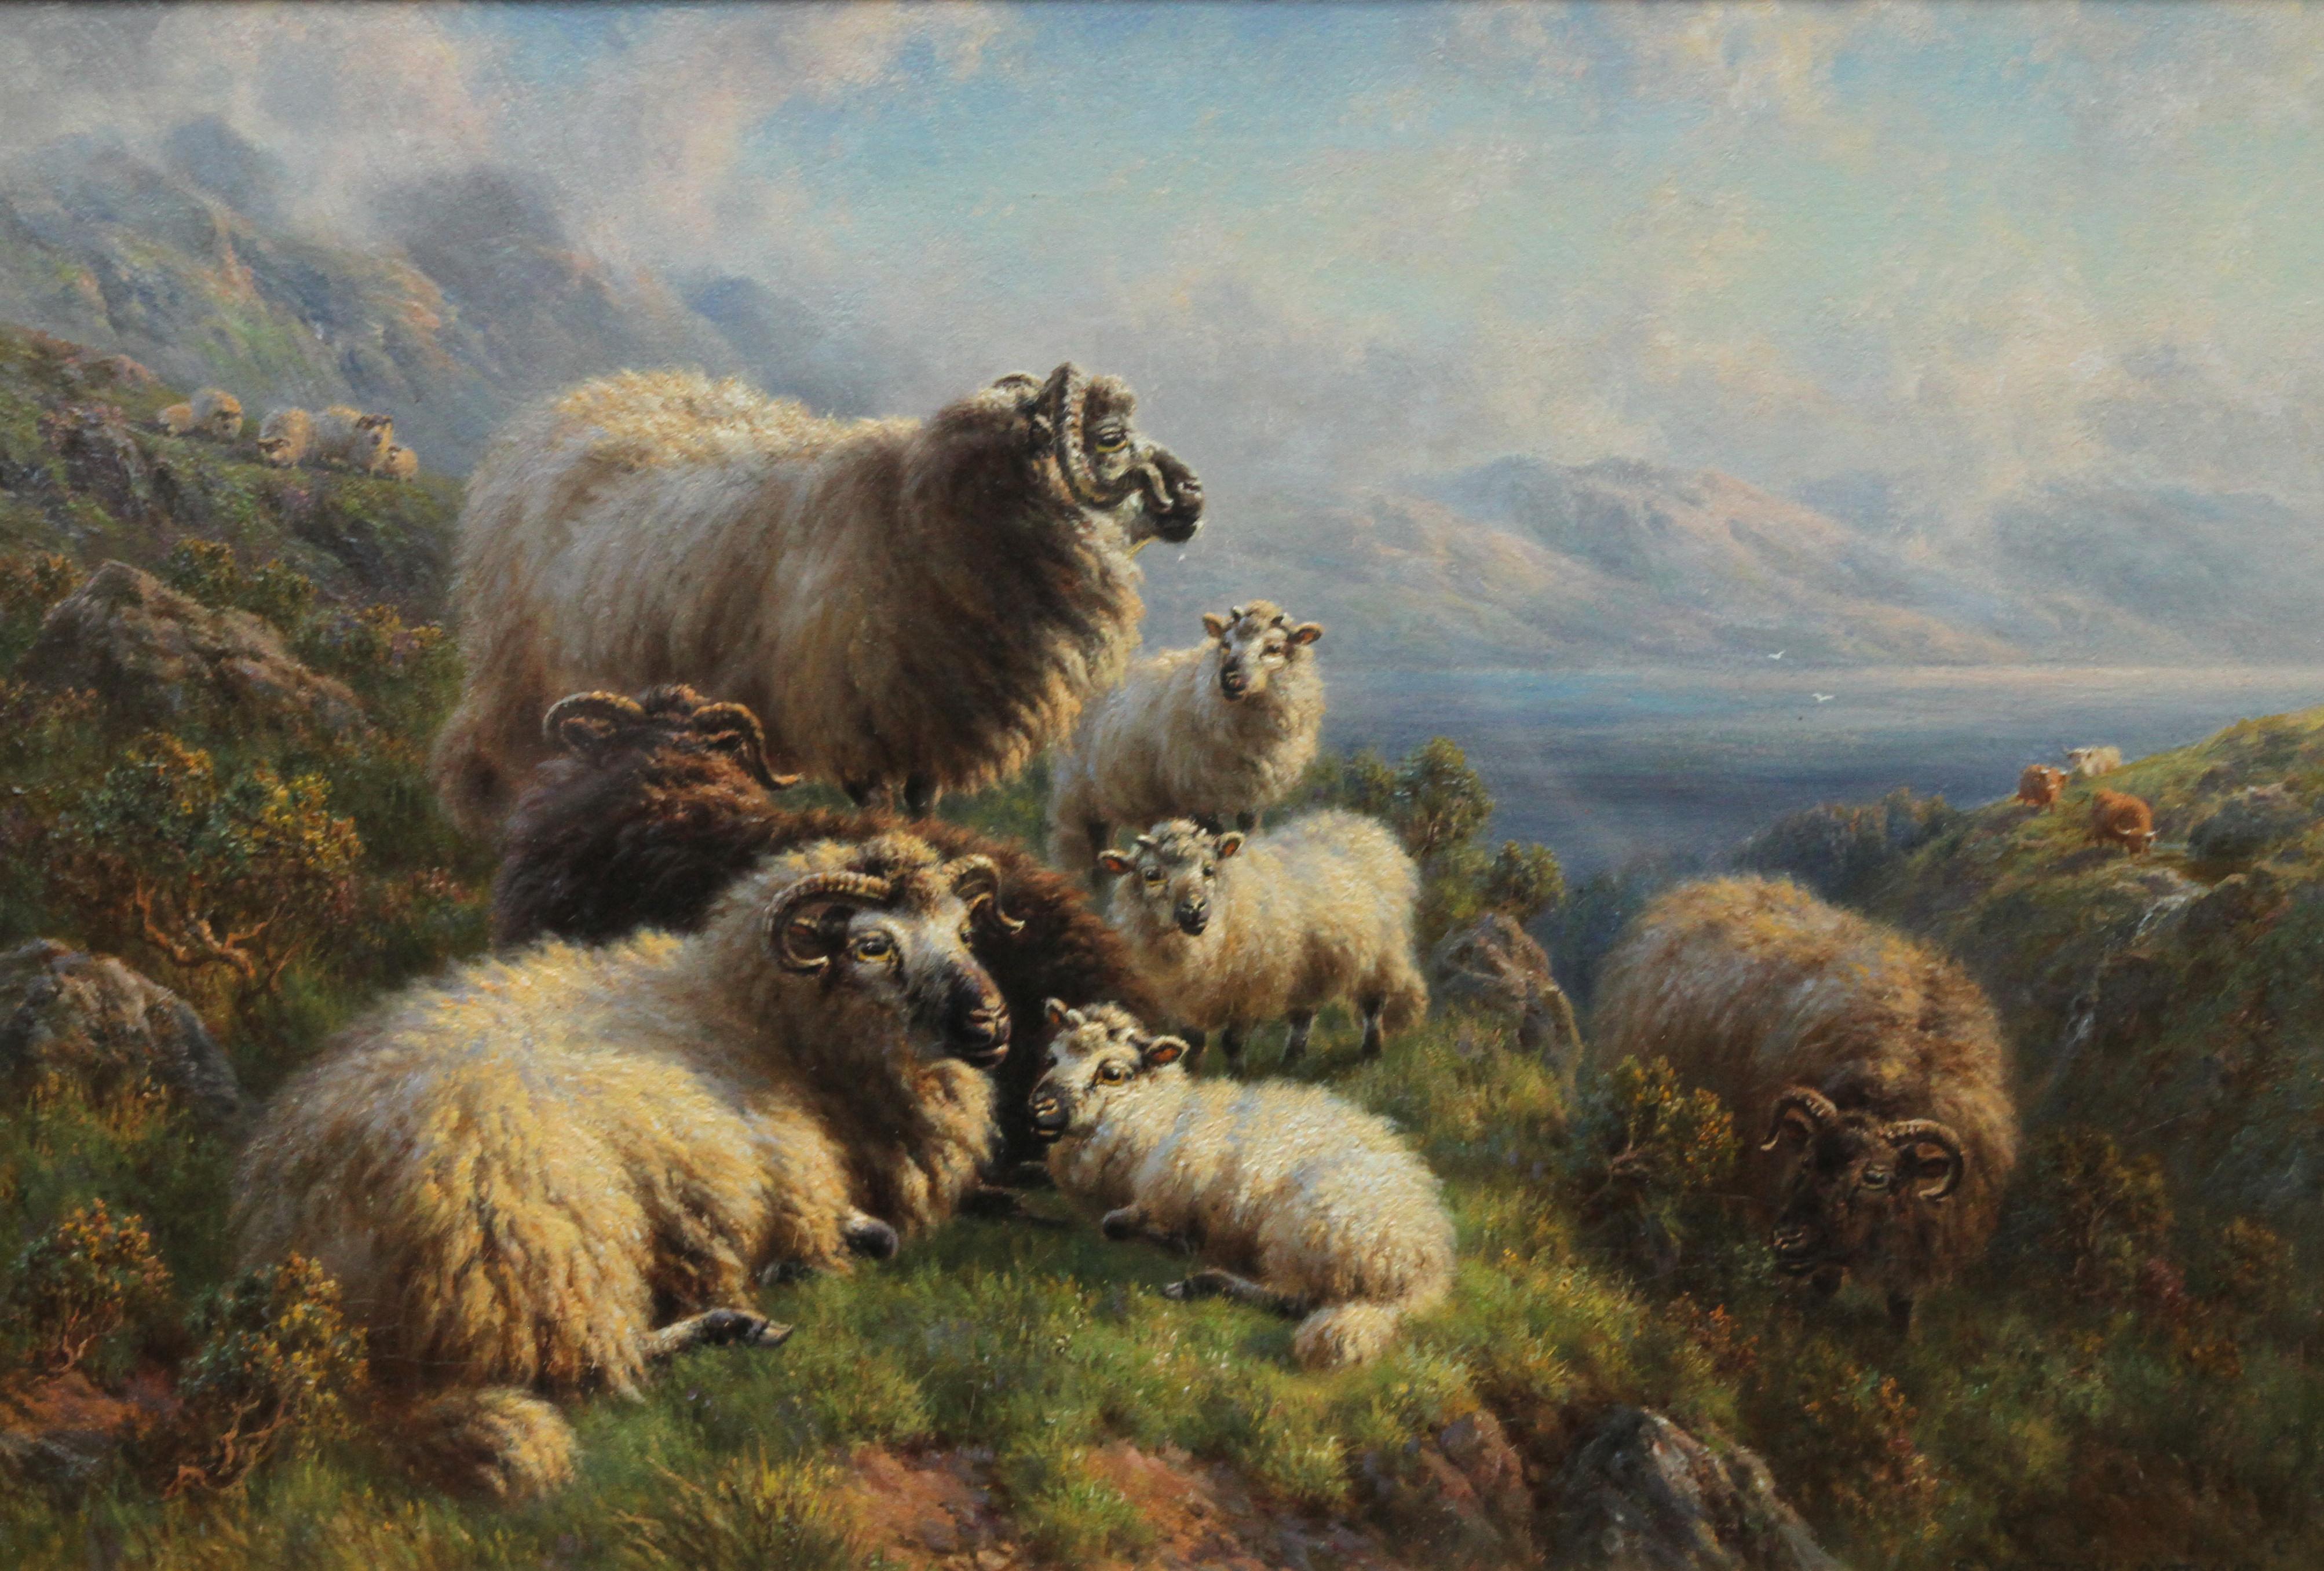 Sheep at Loch Tay Perthshire - British 1910 Edwardian art landscape oil painting - Painting by Arthur Sydney Watson